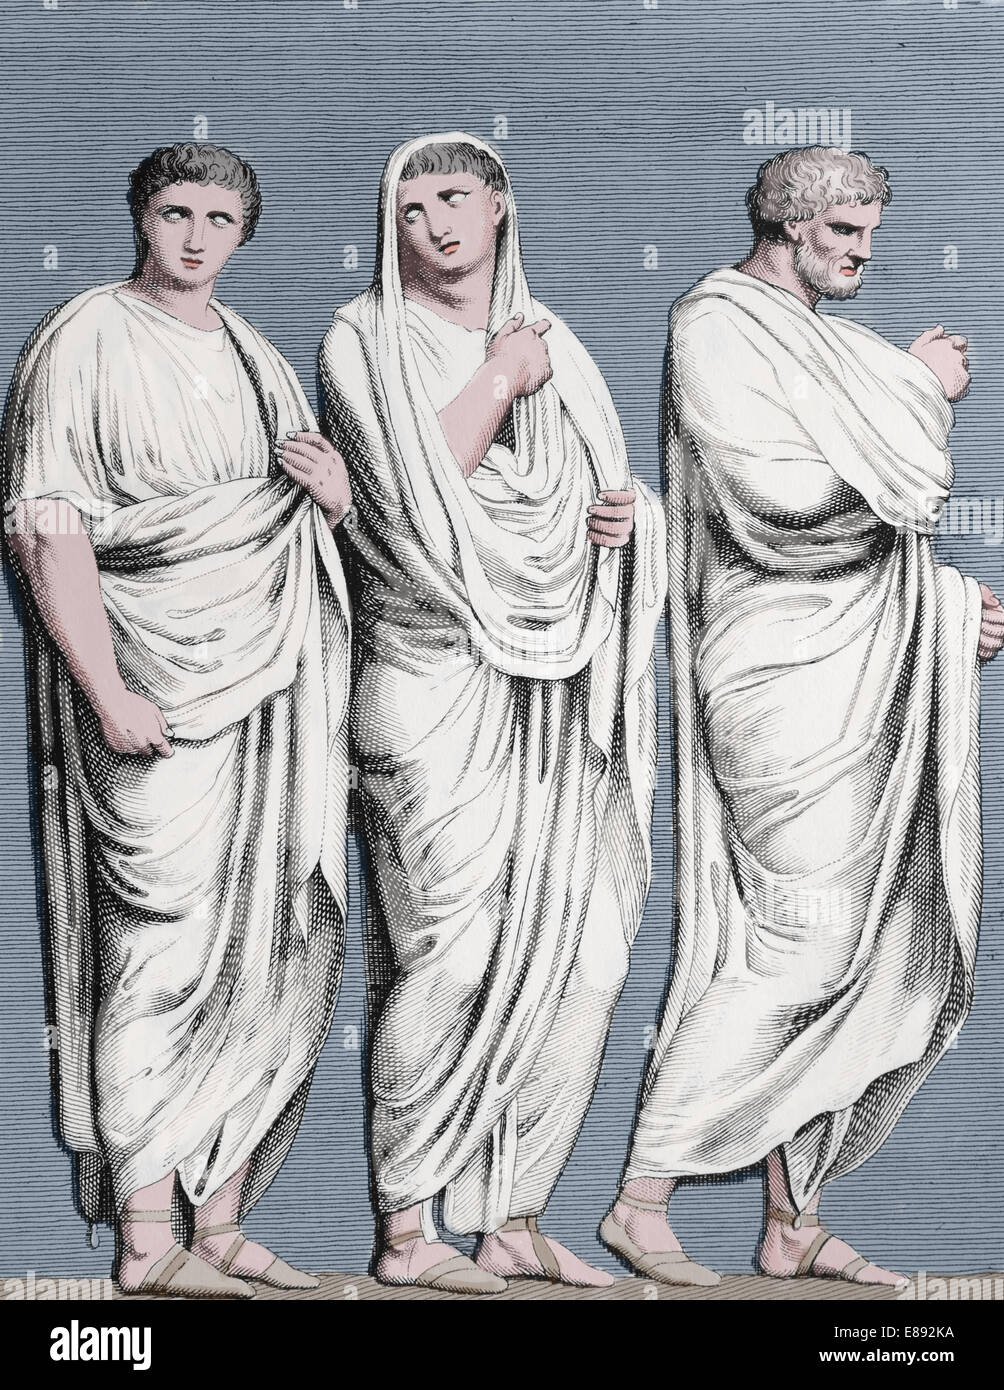 Did Ancient Roman Togas Have Pockets? HistoryExtra ...